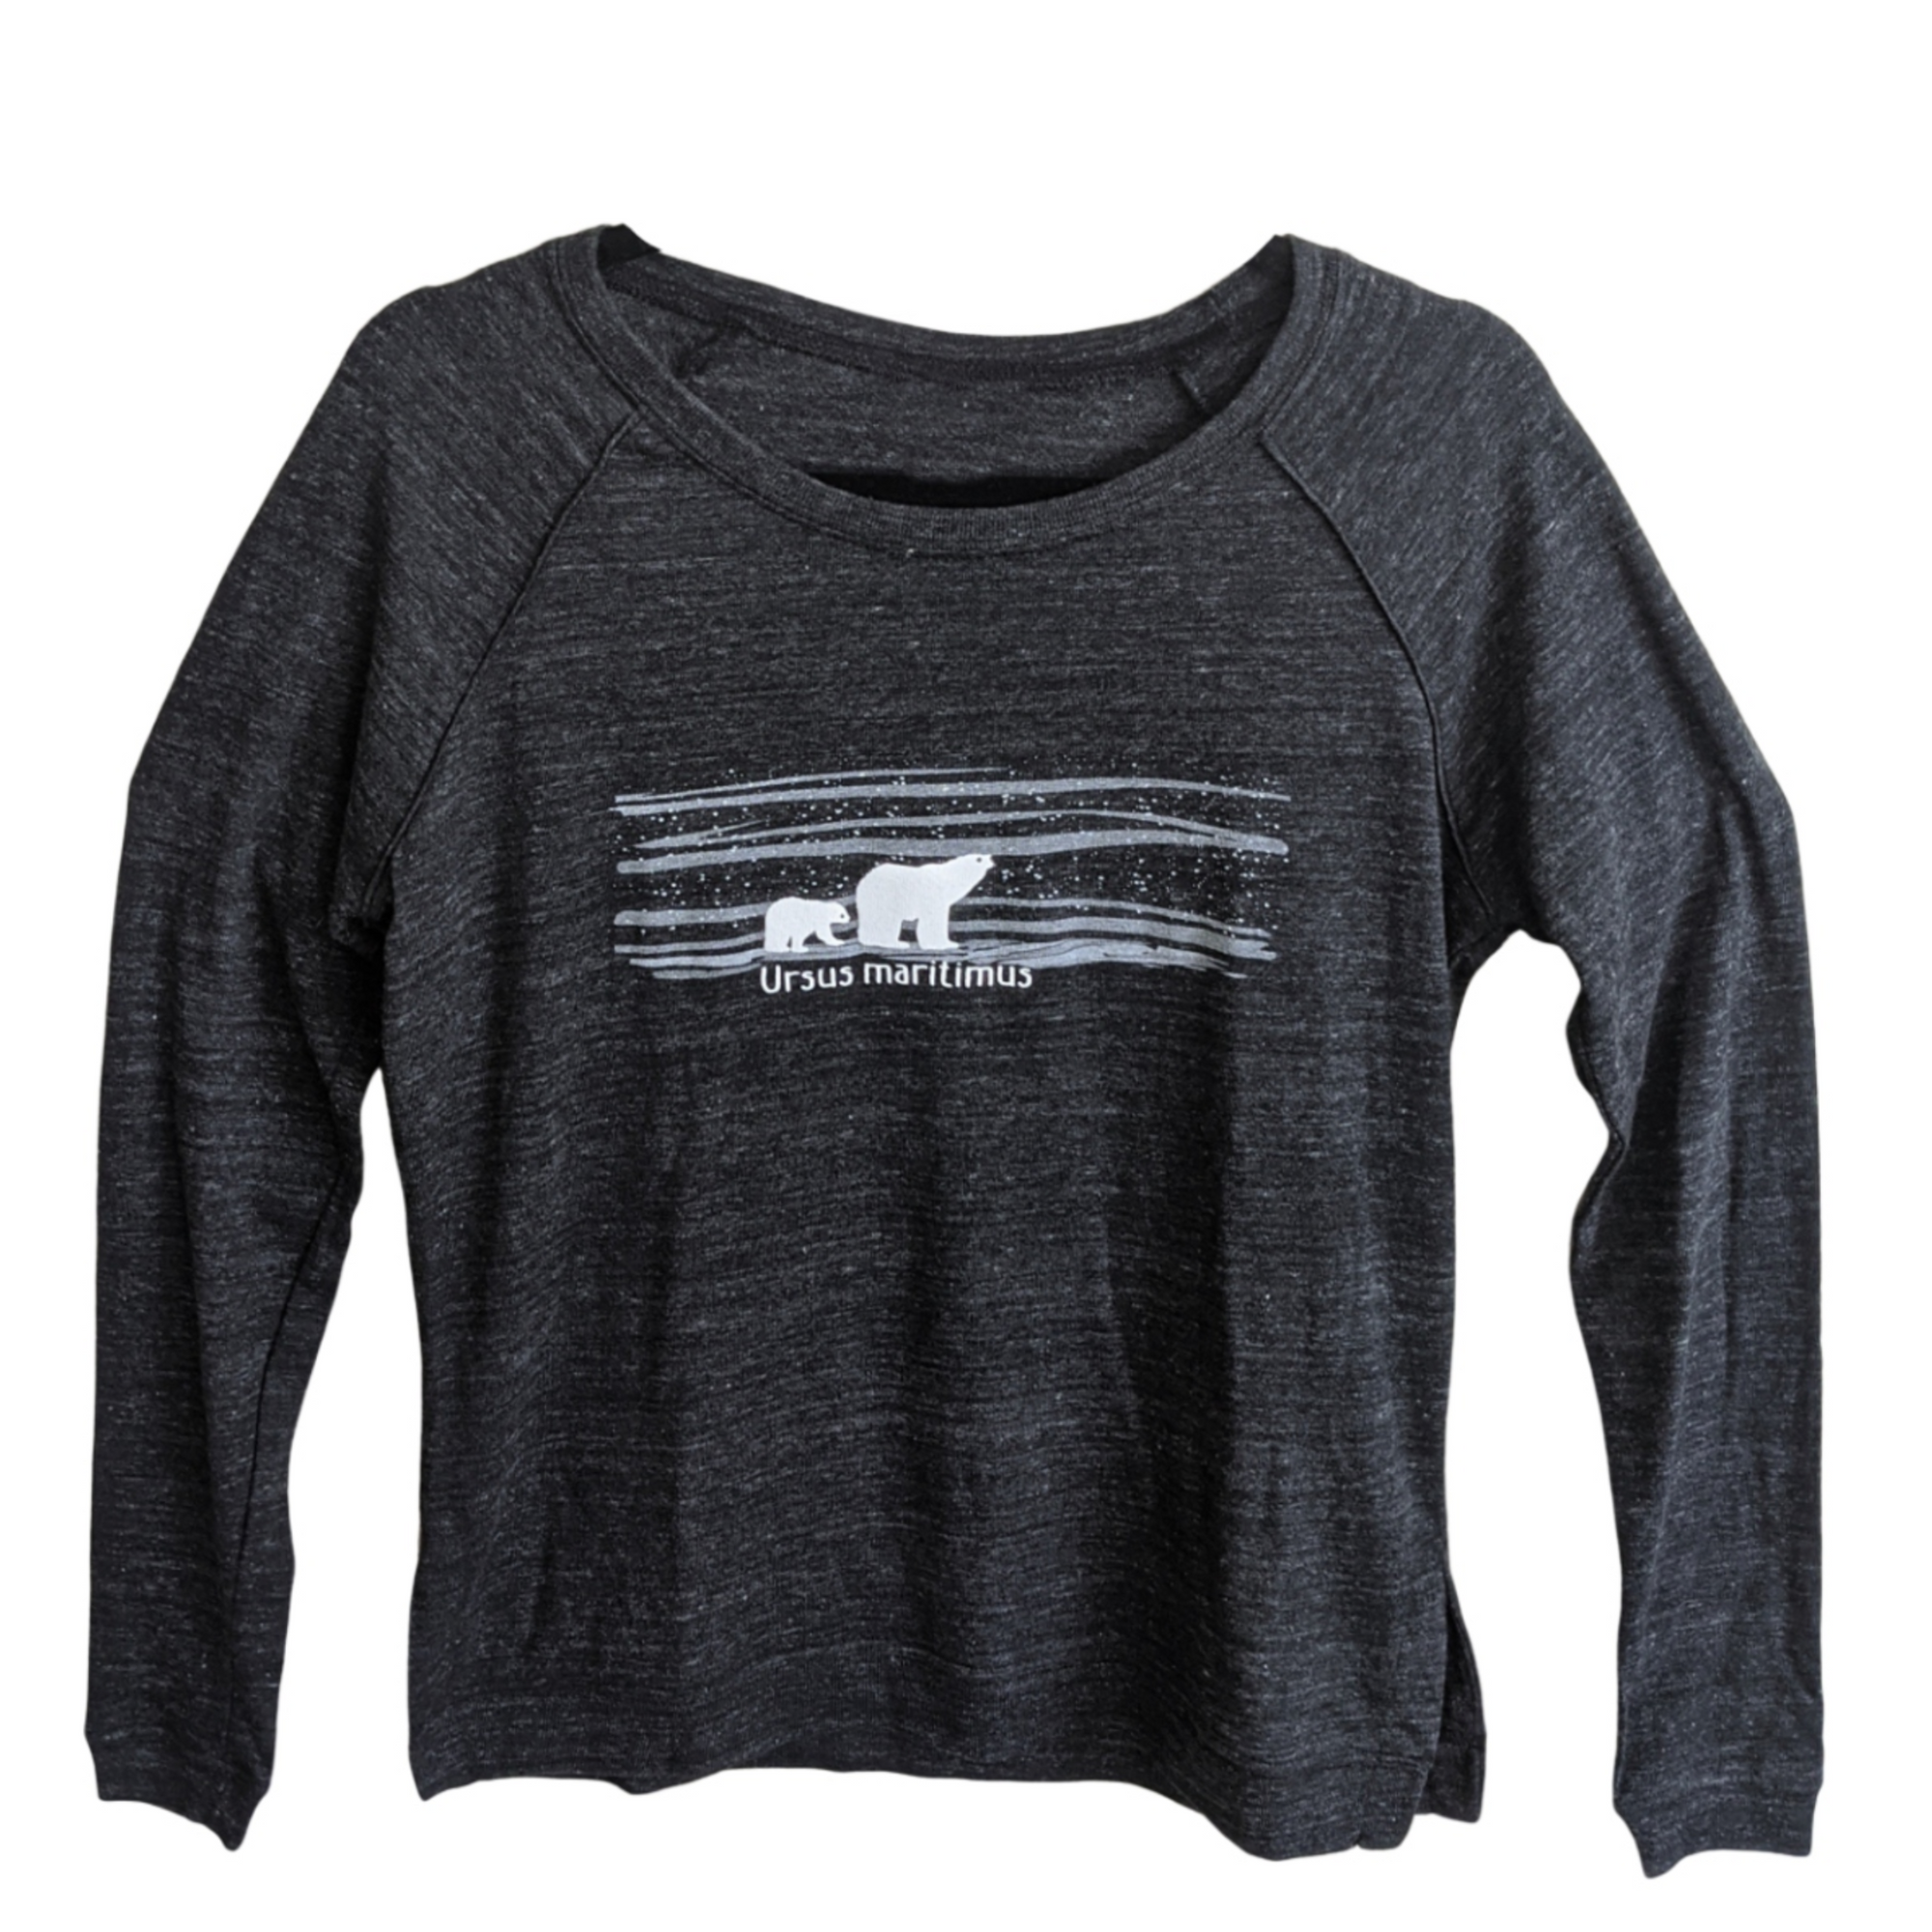 Polar Bear Long Sleeve (Women's) - GreenHive Collective - ECO-FRIENDLY APPAREL